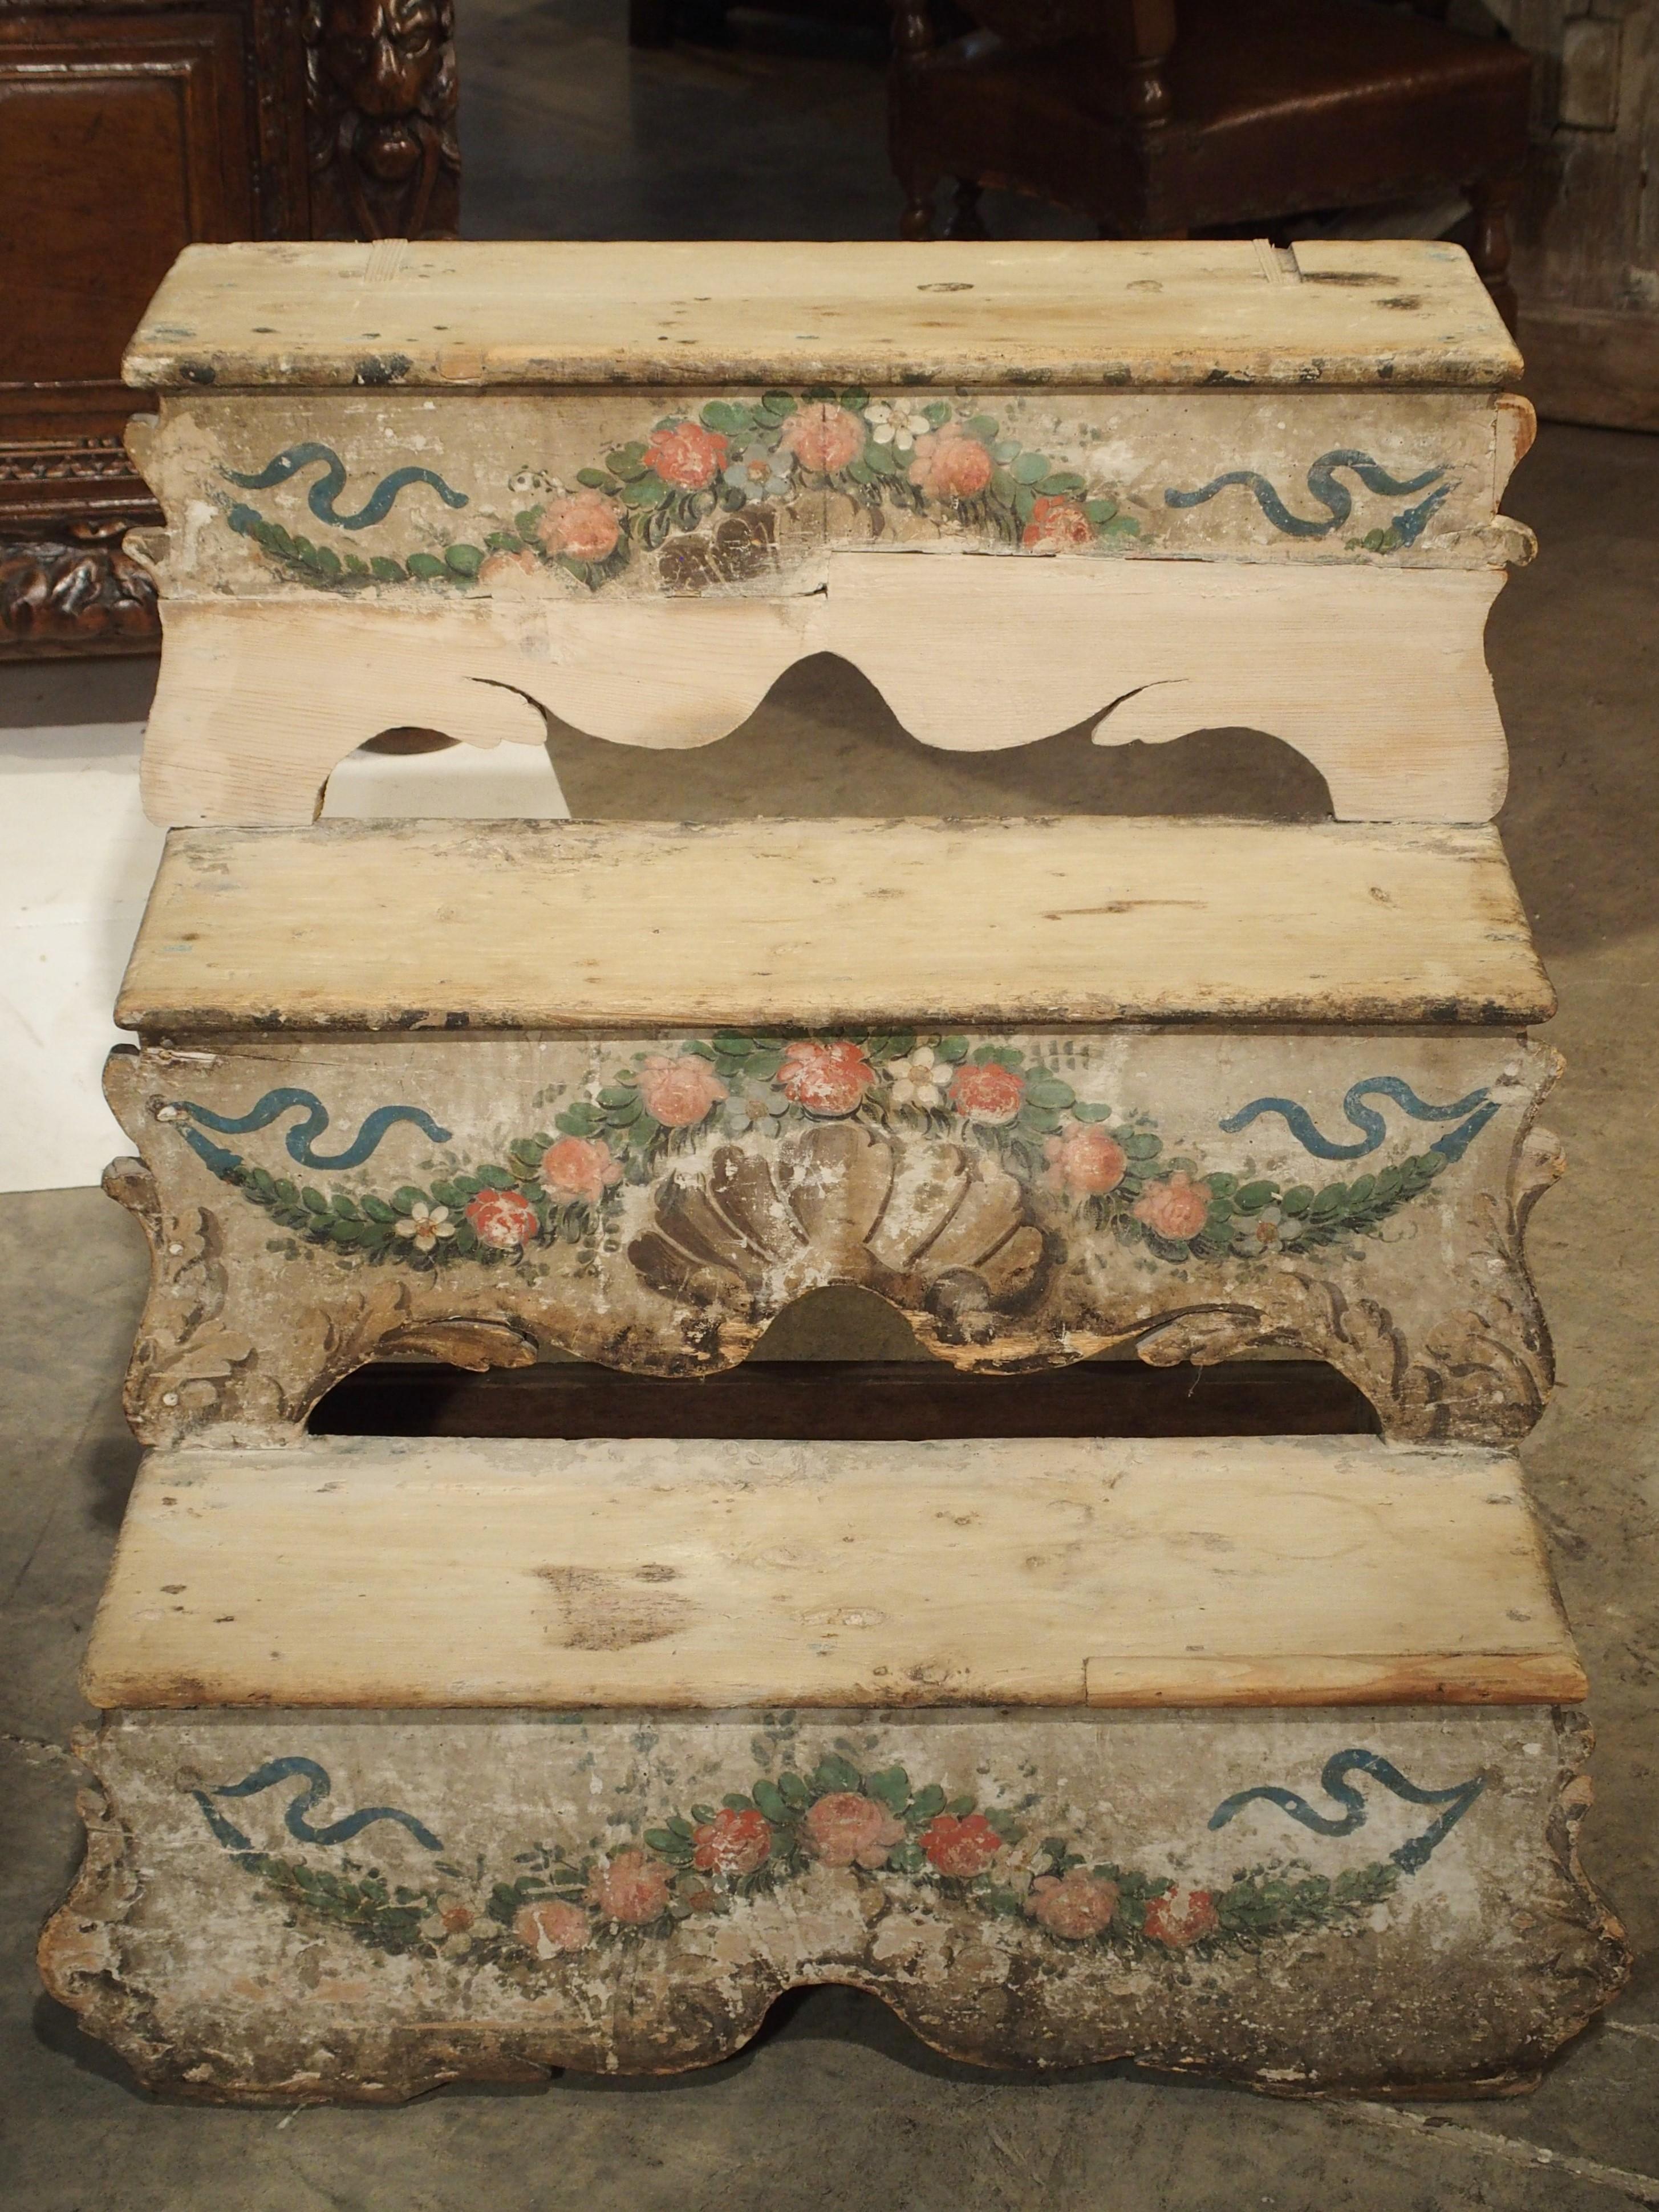 This charming set of stairs is composed of three hand painted steps each measuring roughly 9 3/4 inches high. The motifs on the front of the stairs are swags of pink flowers, acanthus leaves, stylized shells and blue ribbons. On the sides are